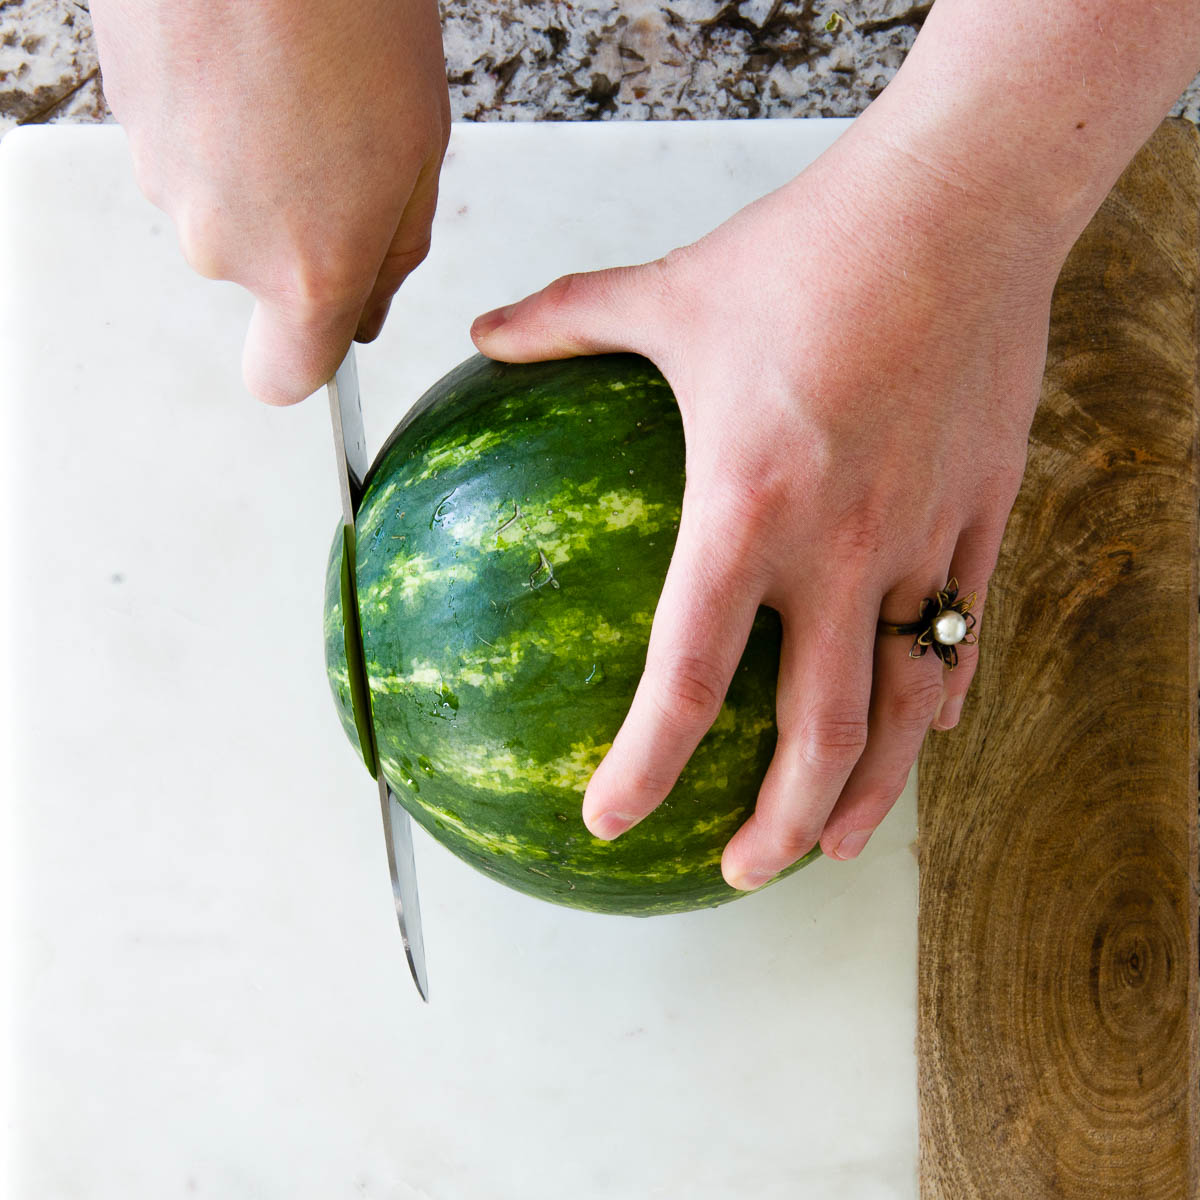 hand holding a small watermelon and slicing with a chef's knife.